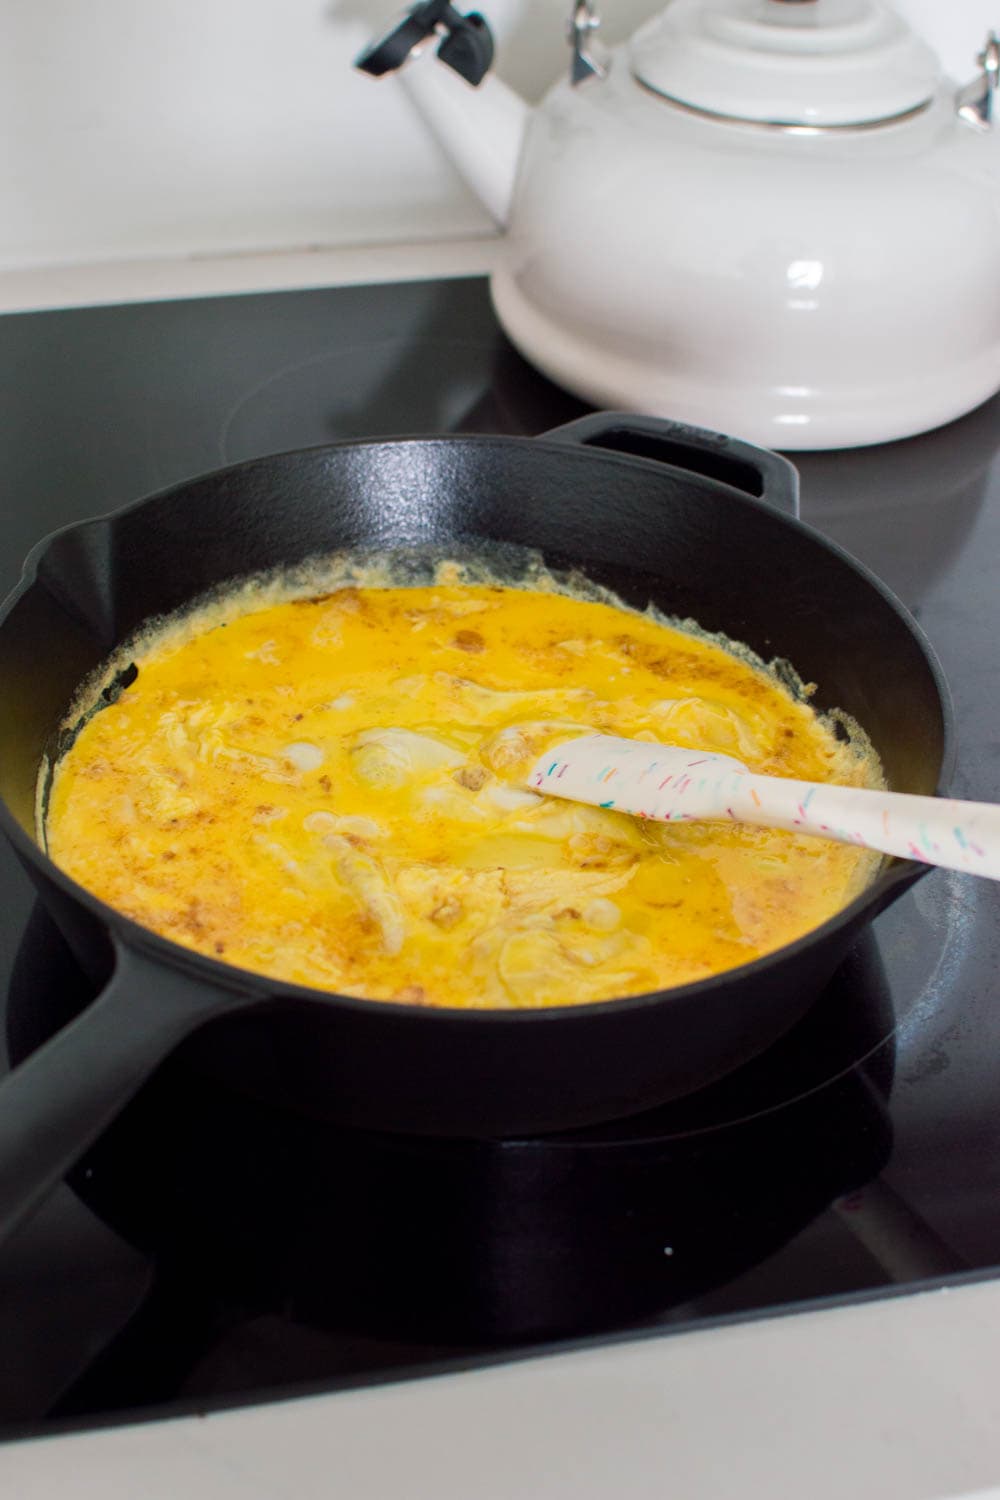 Frying some eggs to make easy scrambled eggs in a black cast iron pan